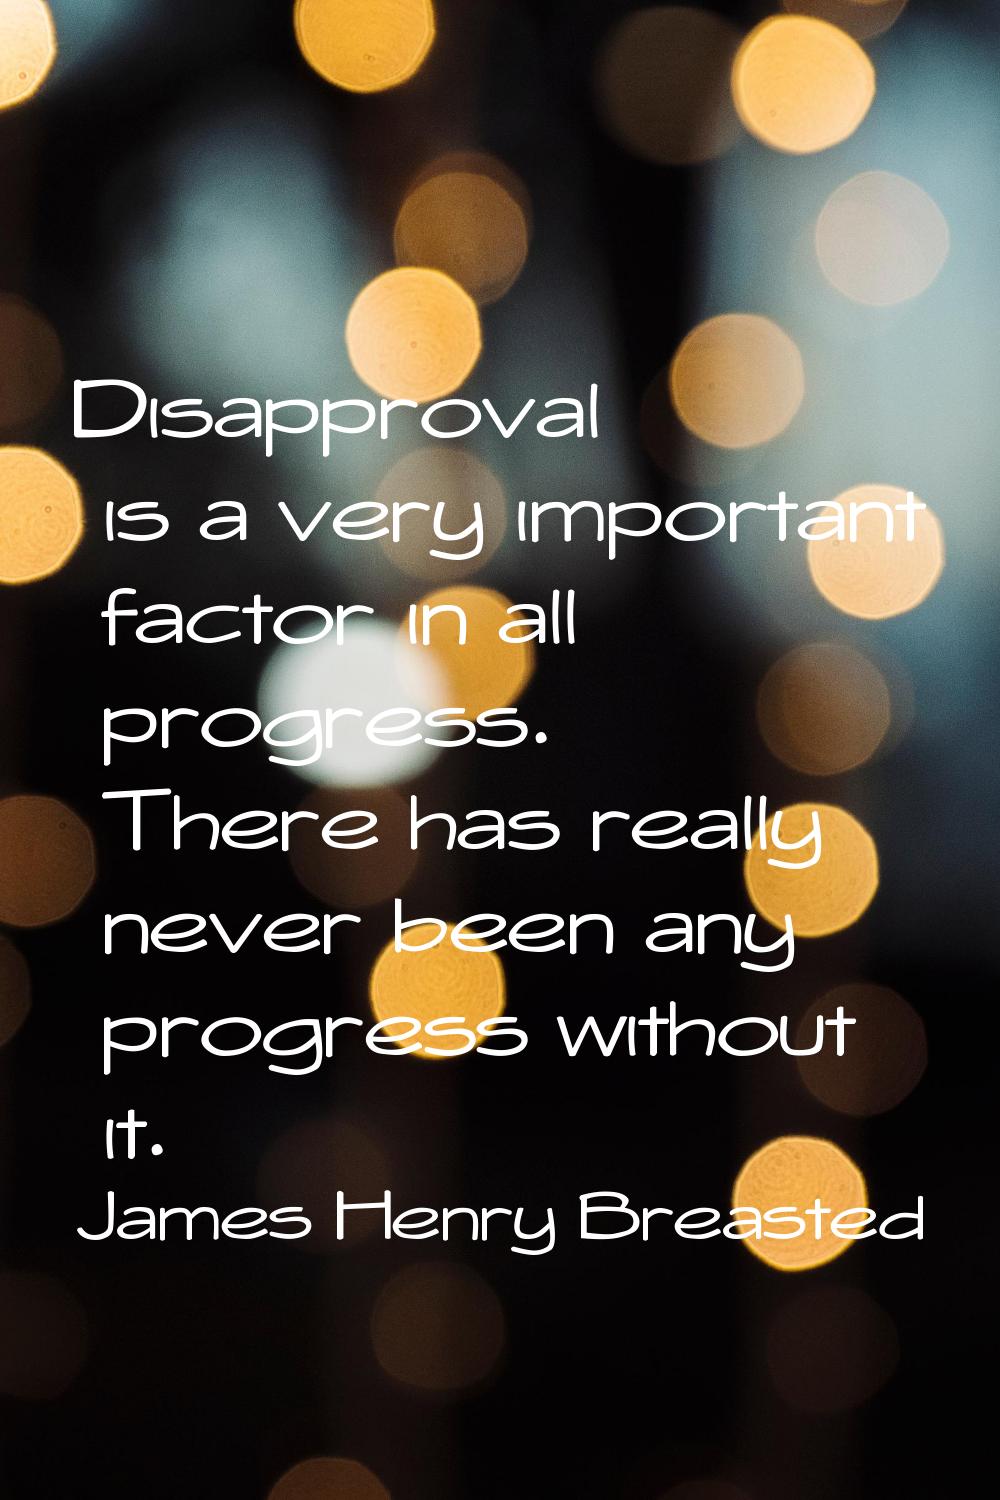 Disapproval is a very important factor in all progress. There has really never been any progress wi